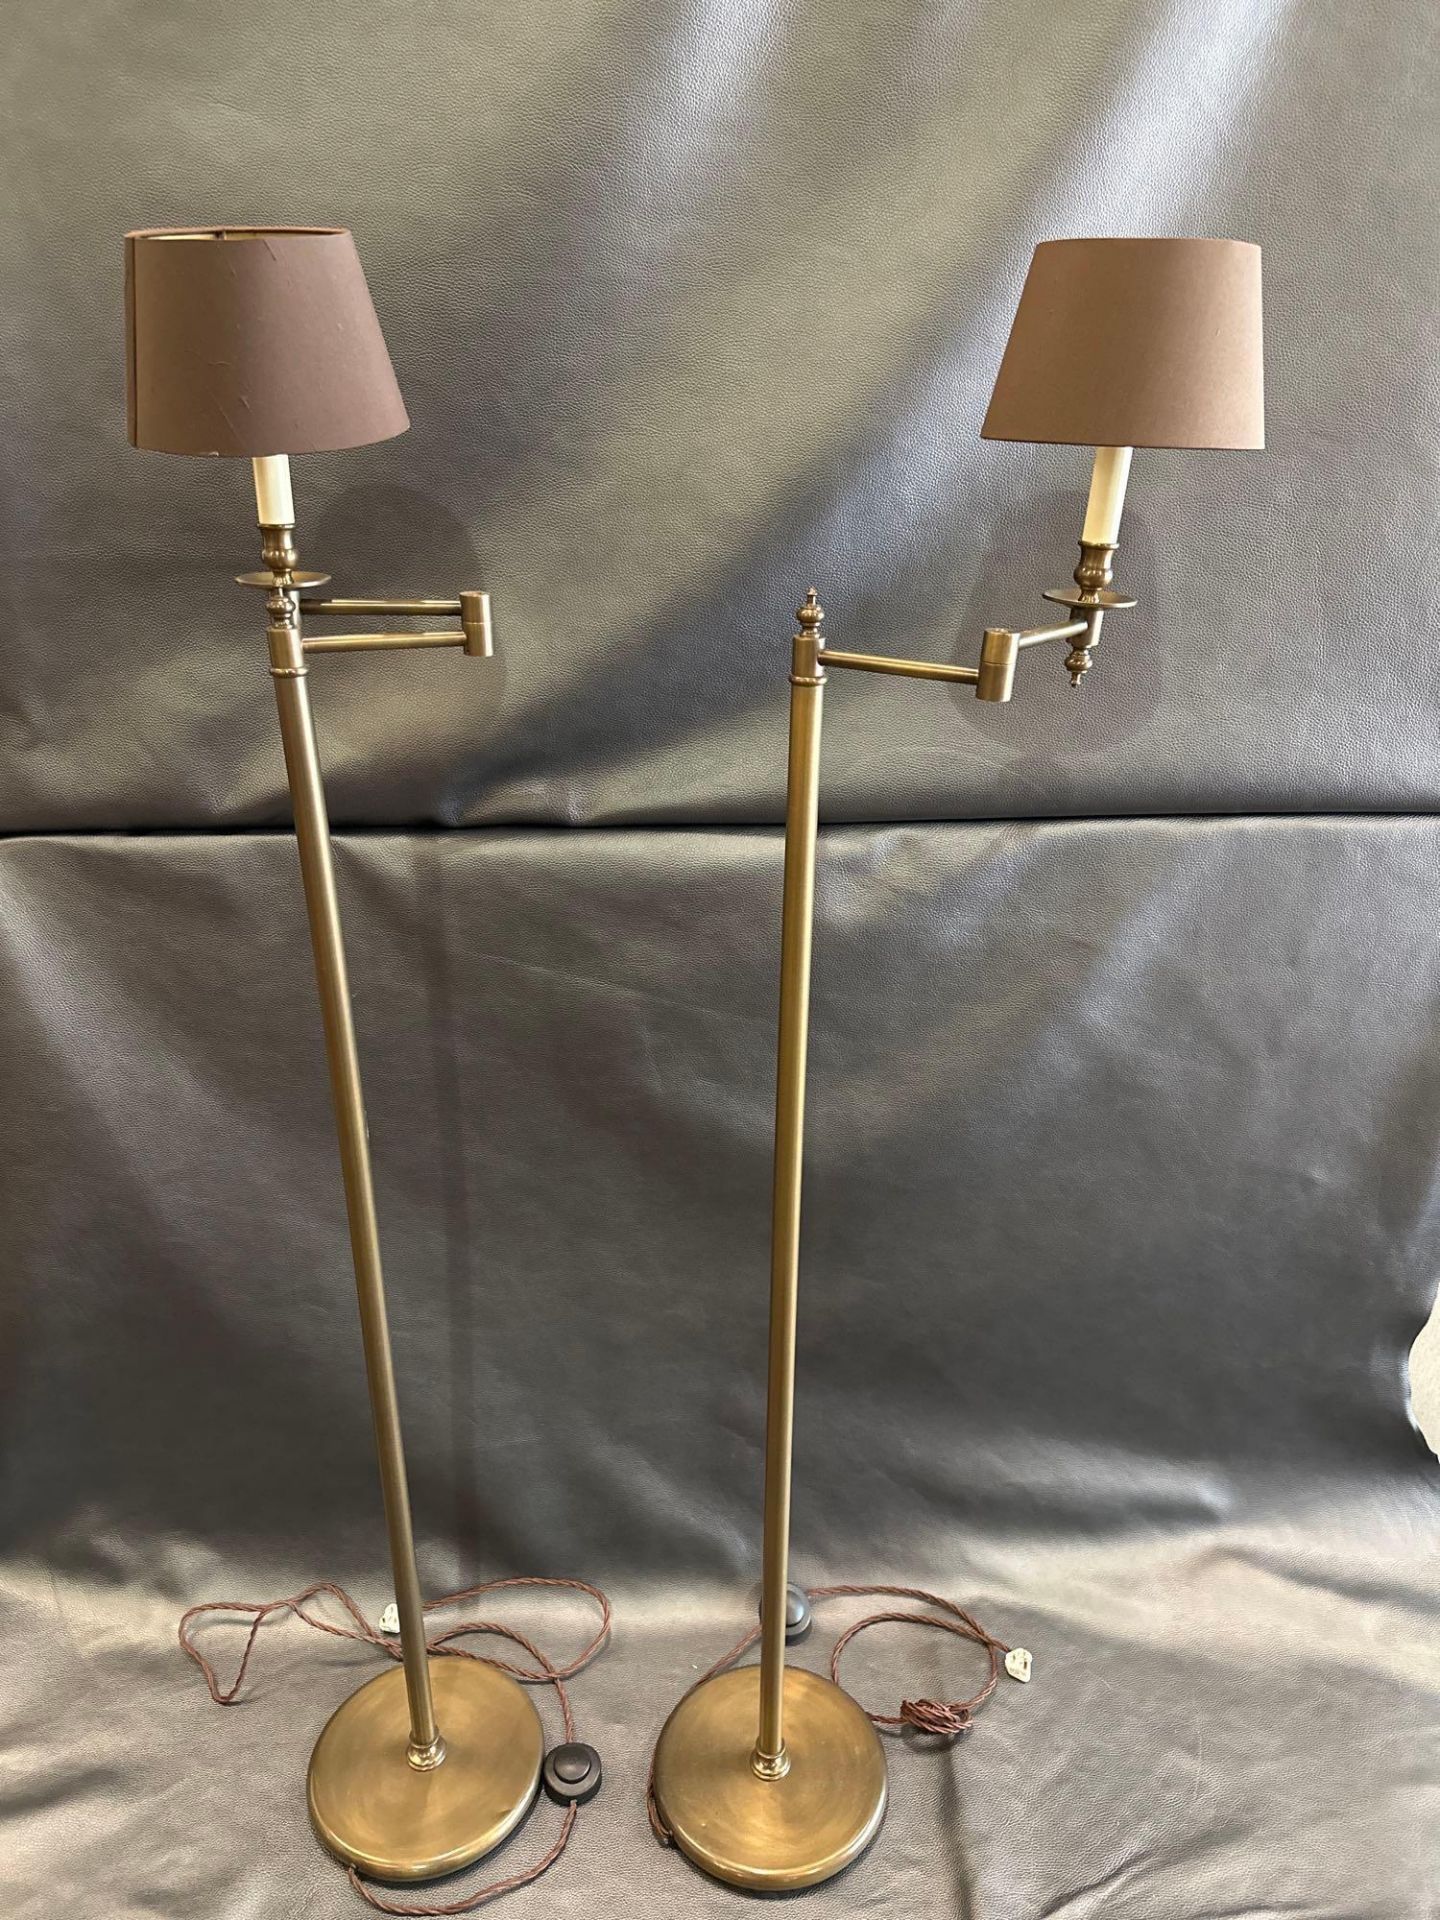 A Pair Library Floor Lamps Finished In English Bronze Swing Arm Function With Shade 156cm - Image 2 of 5